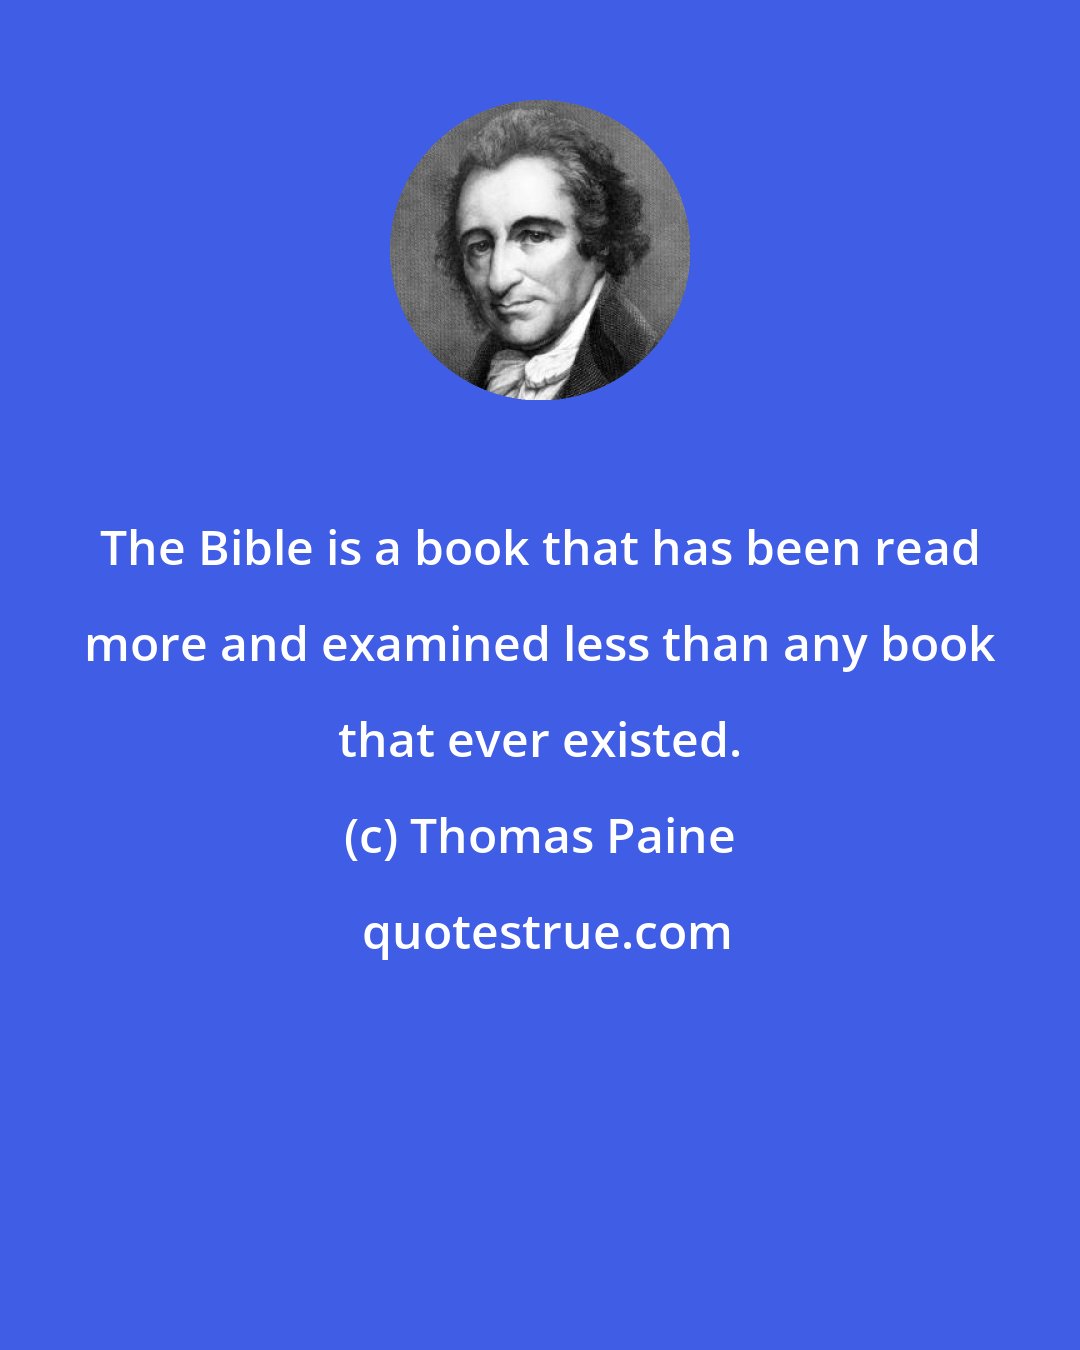 Thomas Paine: The Bible is a book that has been read more and examined less than any book that ever existed.